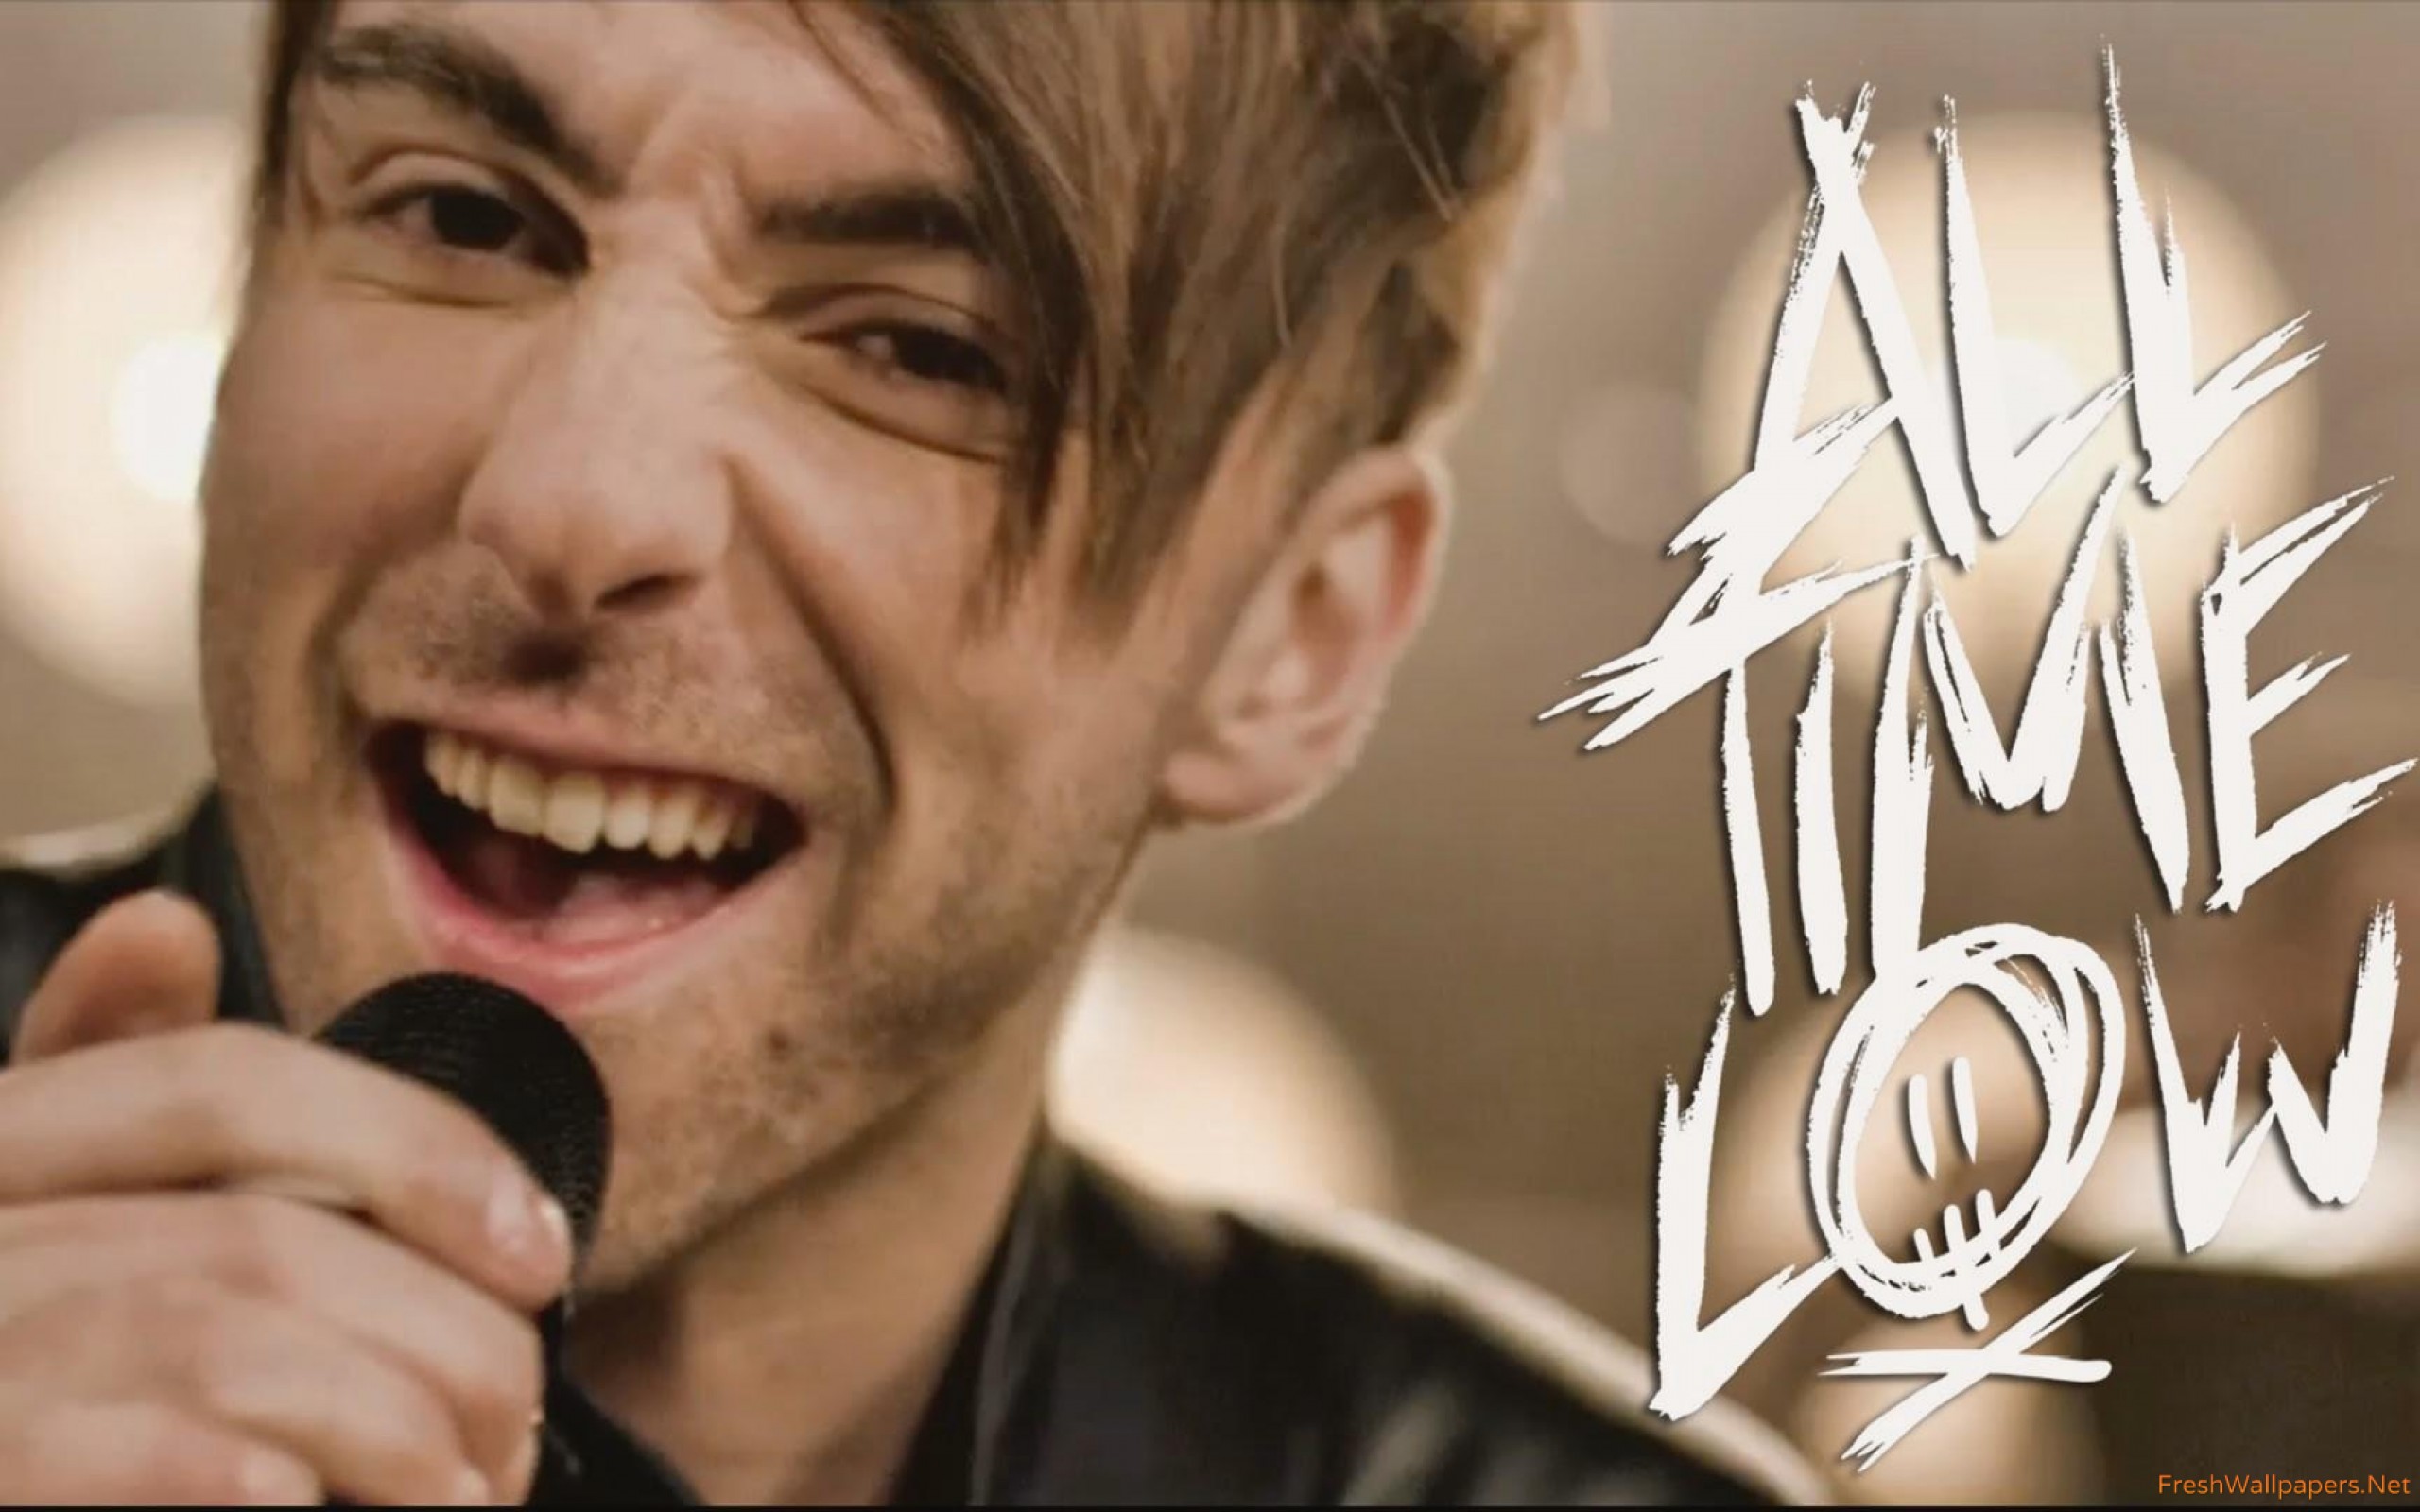 All Time Low - HD Wallpaper 